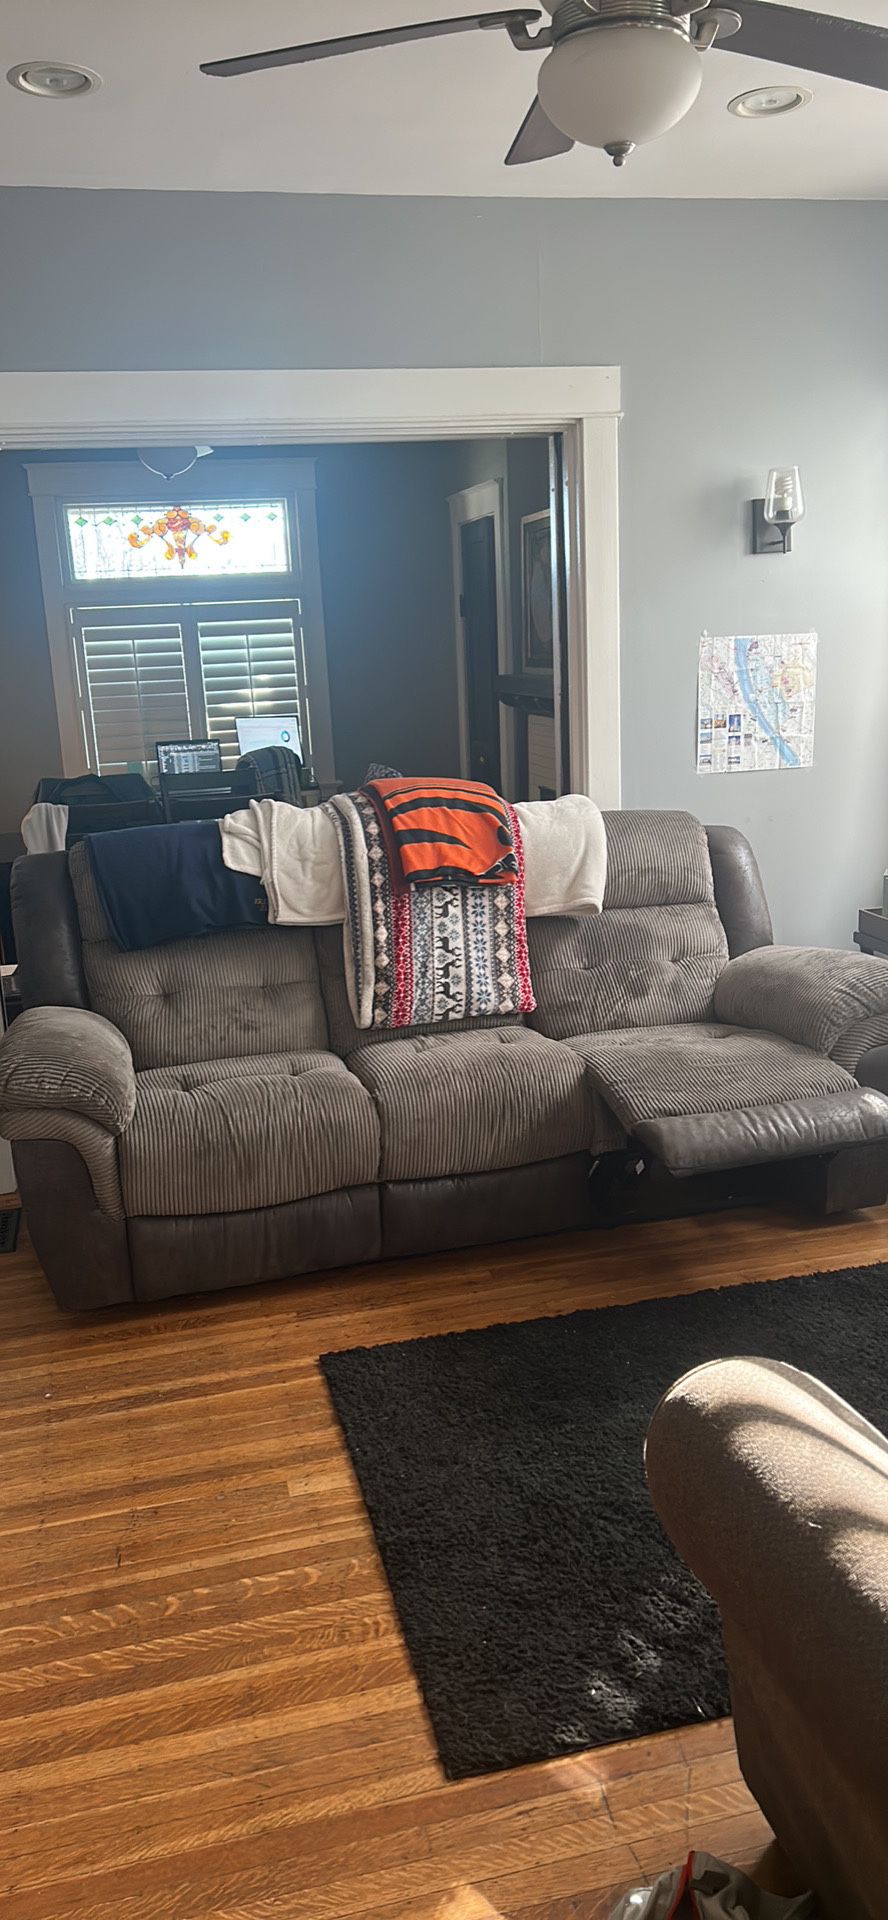 Couch, Double Side Recliners